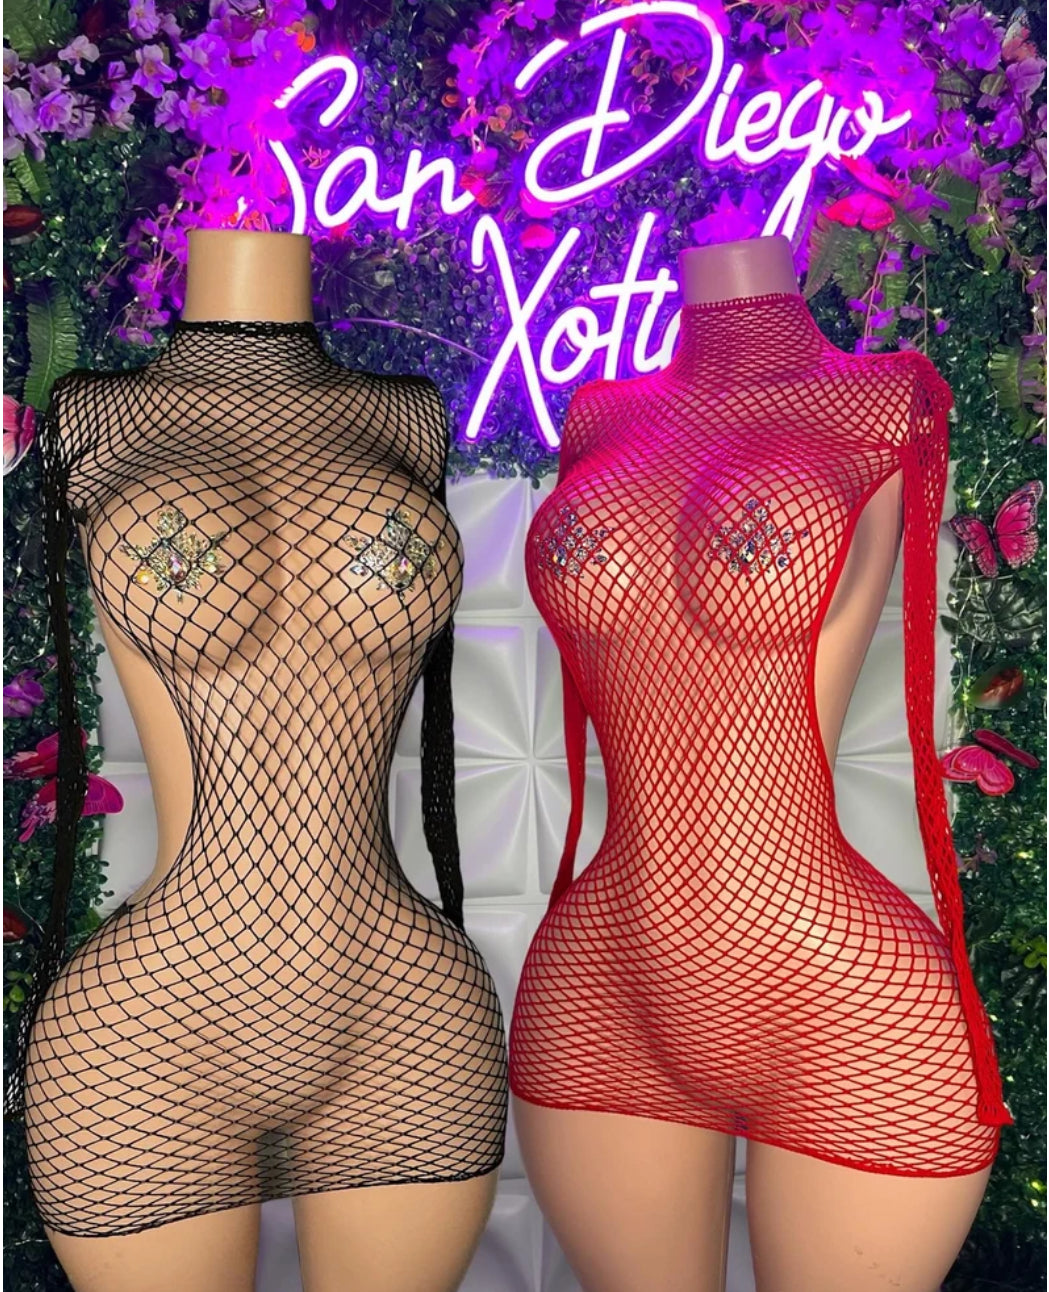 WHOLESALE FISHNETS 10 PIECE BUNDLE FITS XS-L (CHOSEN FOR YOU OR EMAIL TO CHOOSE. LIMITED SELECTION)